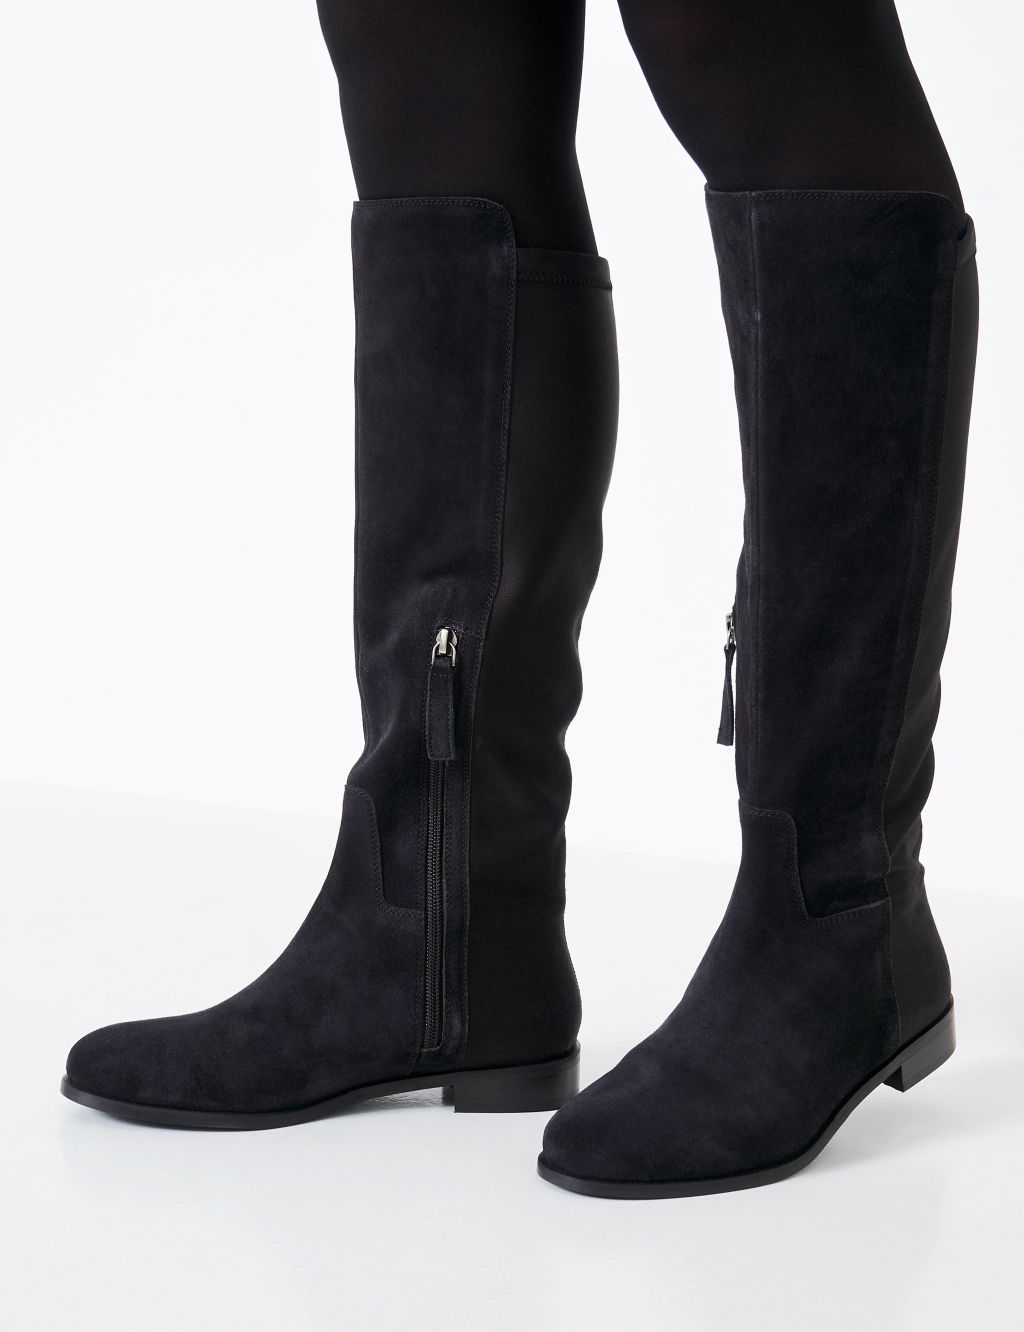 Suede Flat Knee High Boots image 3